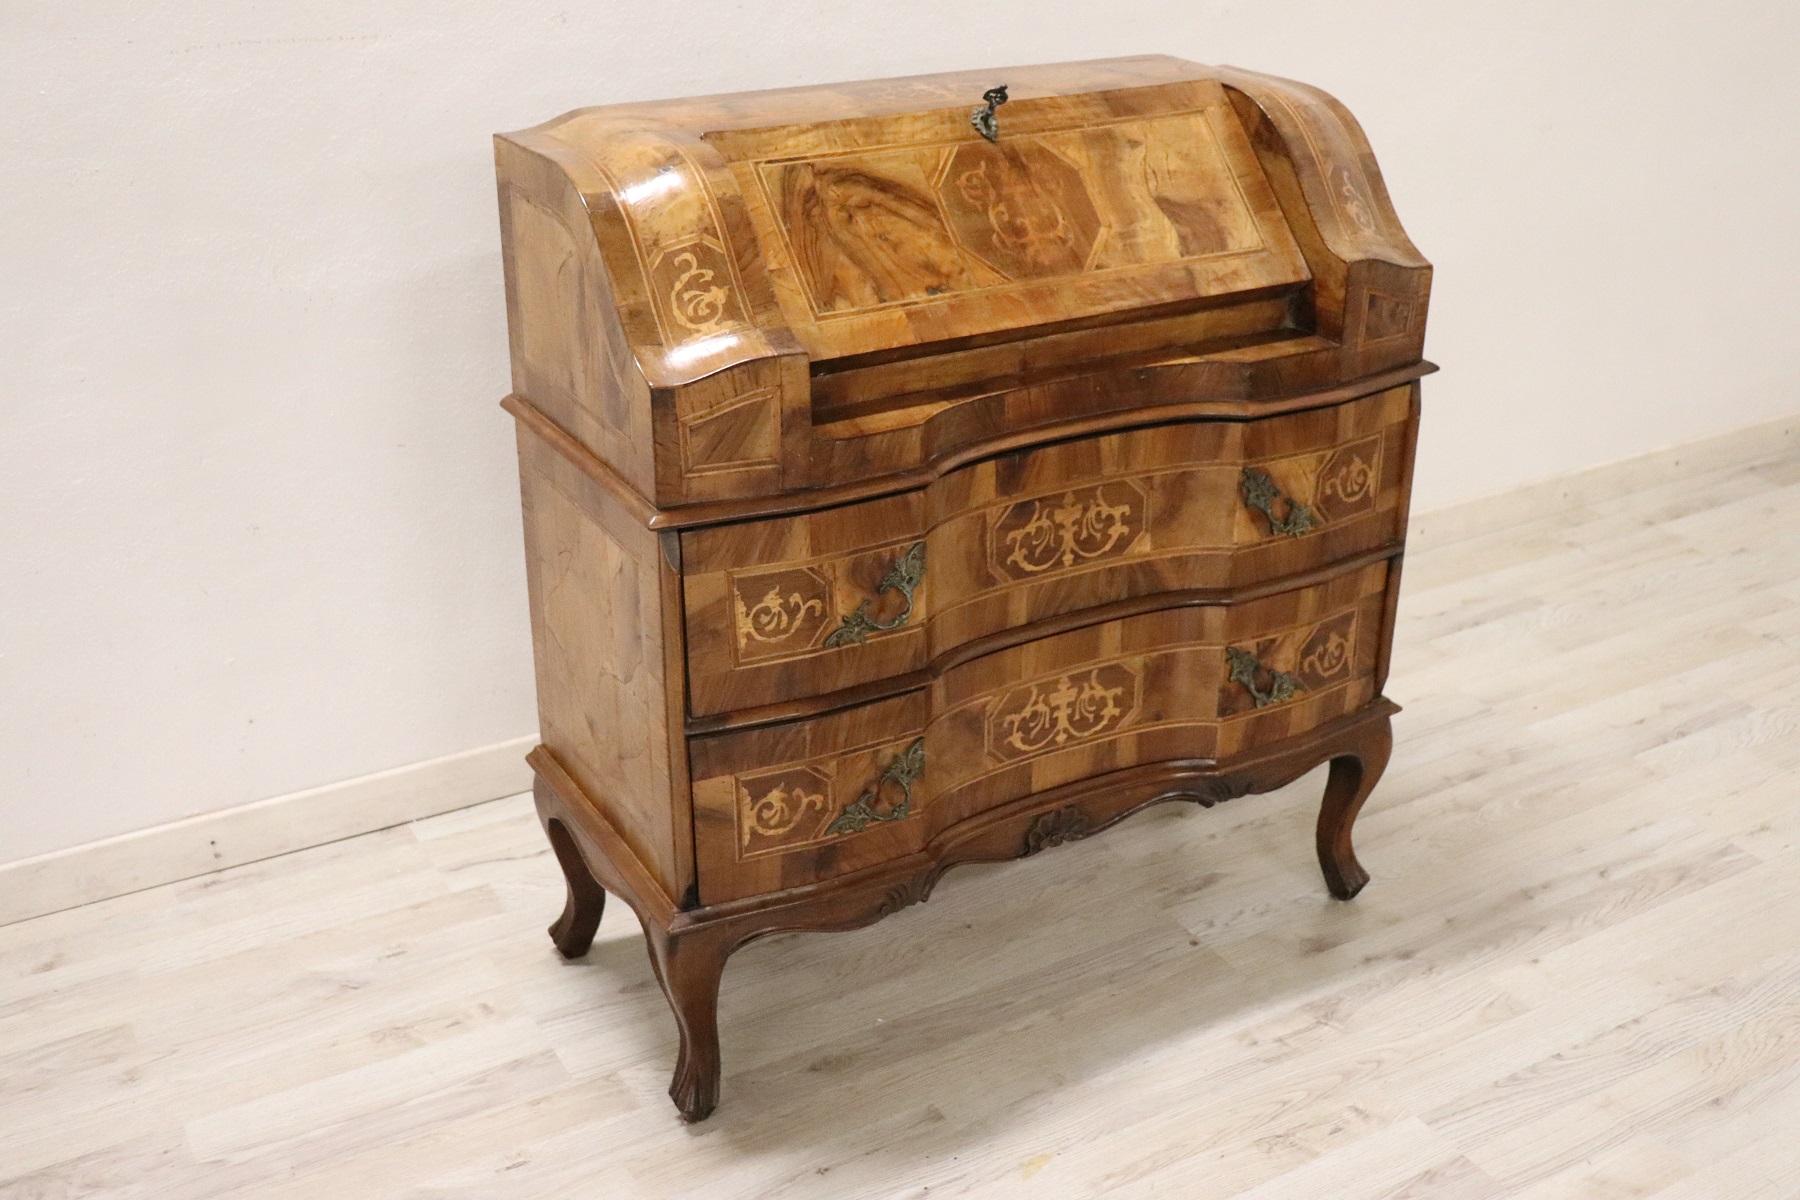 Elegant secretary chest in walnut inlay, 1950s. The openable floor allows a support to write. Inside four small drawers. There are no internal secret compartments. In front of two comfortable and useful large drawers. Truly elegant and important for